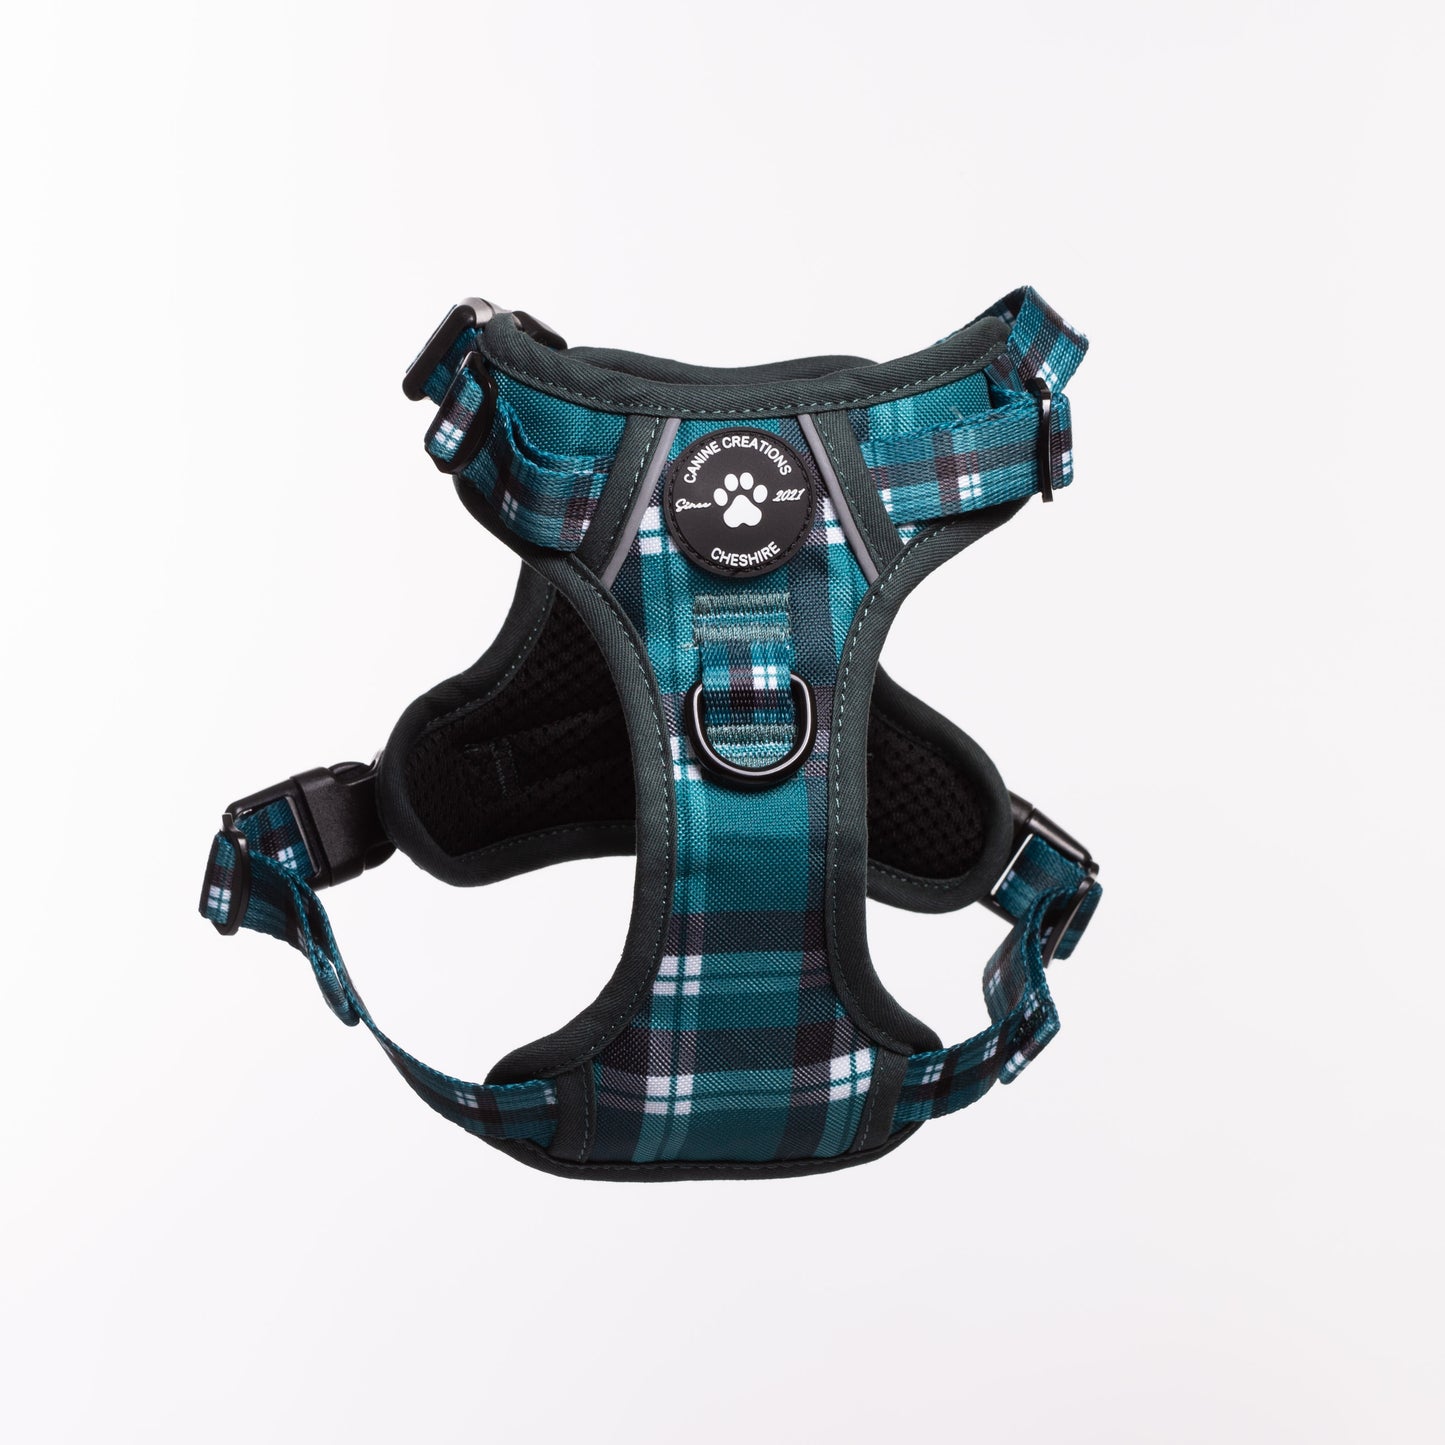 The Chequered Harness